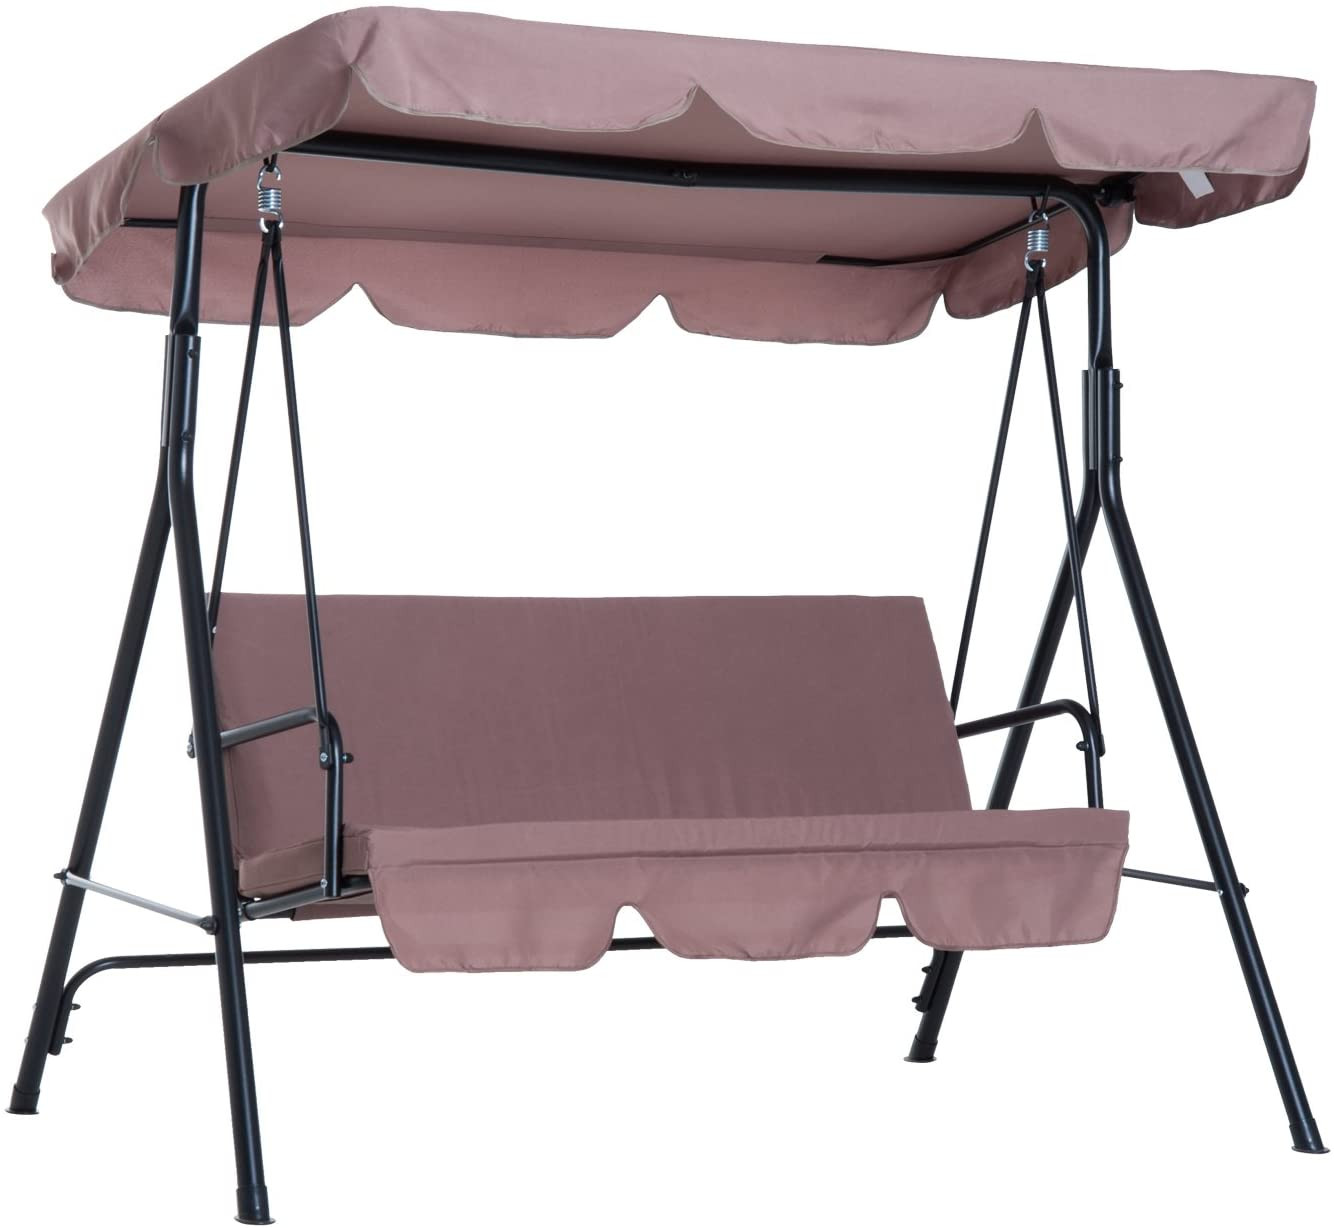 Kids Canopy Swing
 Outsunny 3 Person Glider Canopy Porch Swing